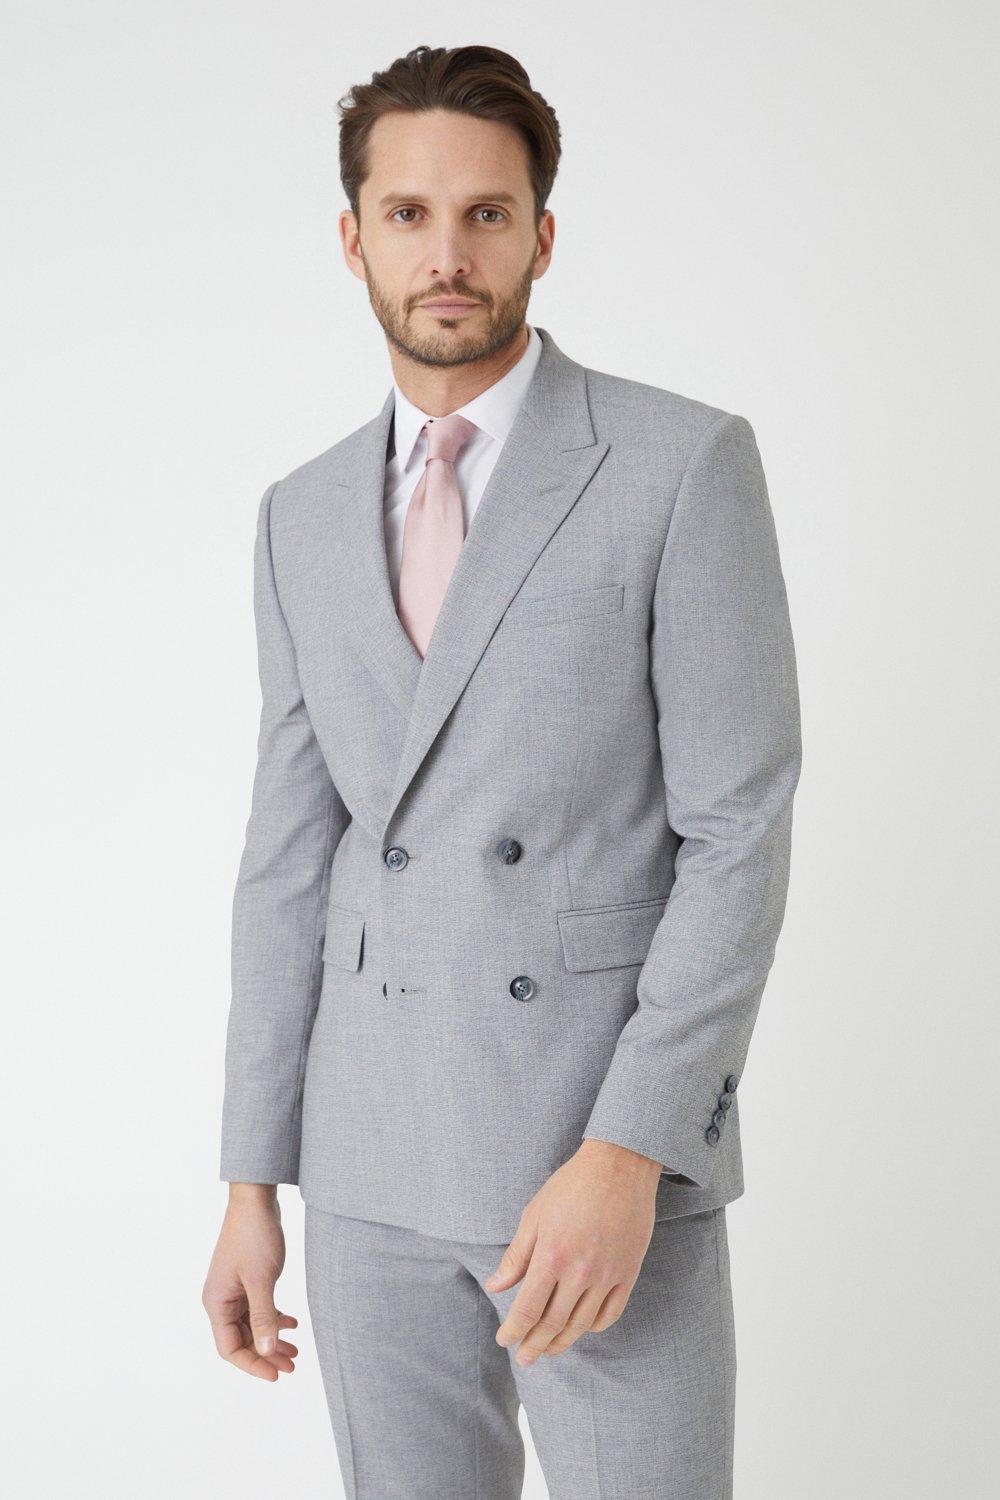 Mens Slim Fit Double Breasted Light Grey Textured Suit Jacket